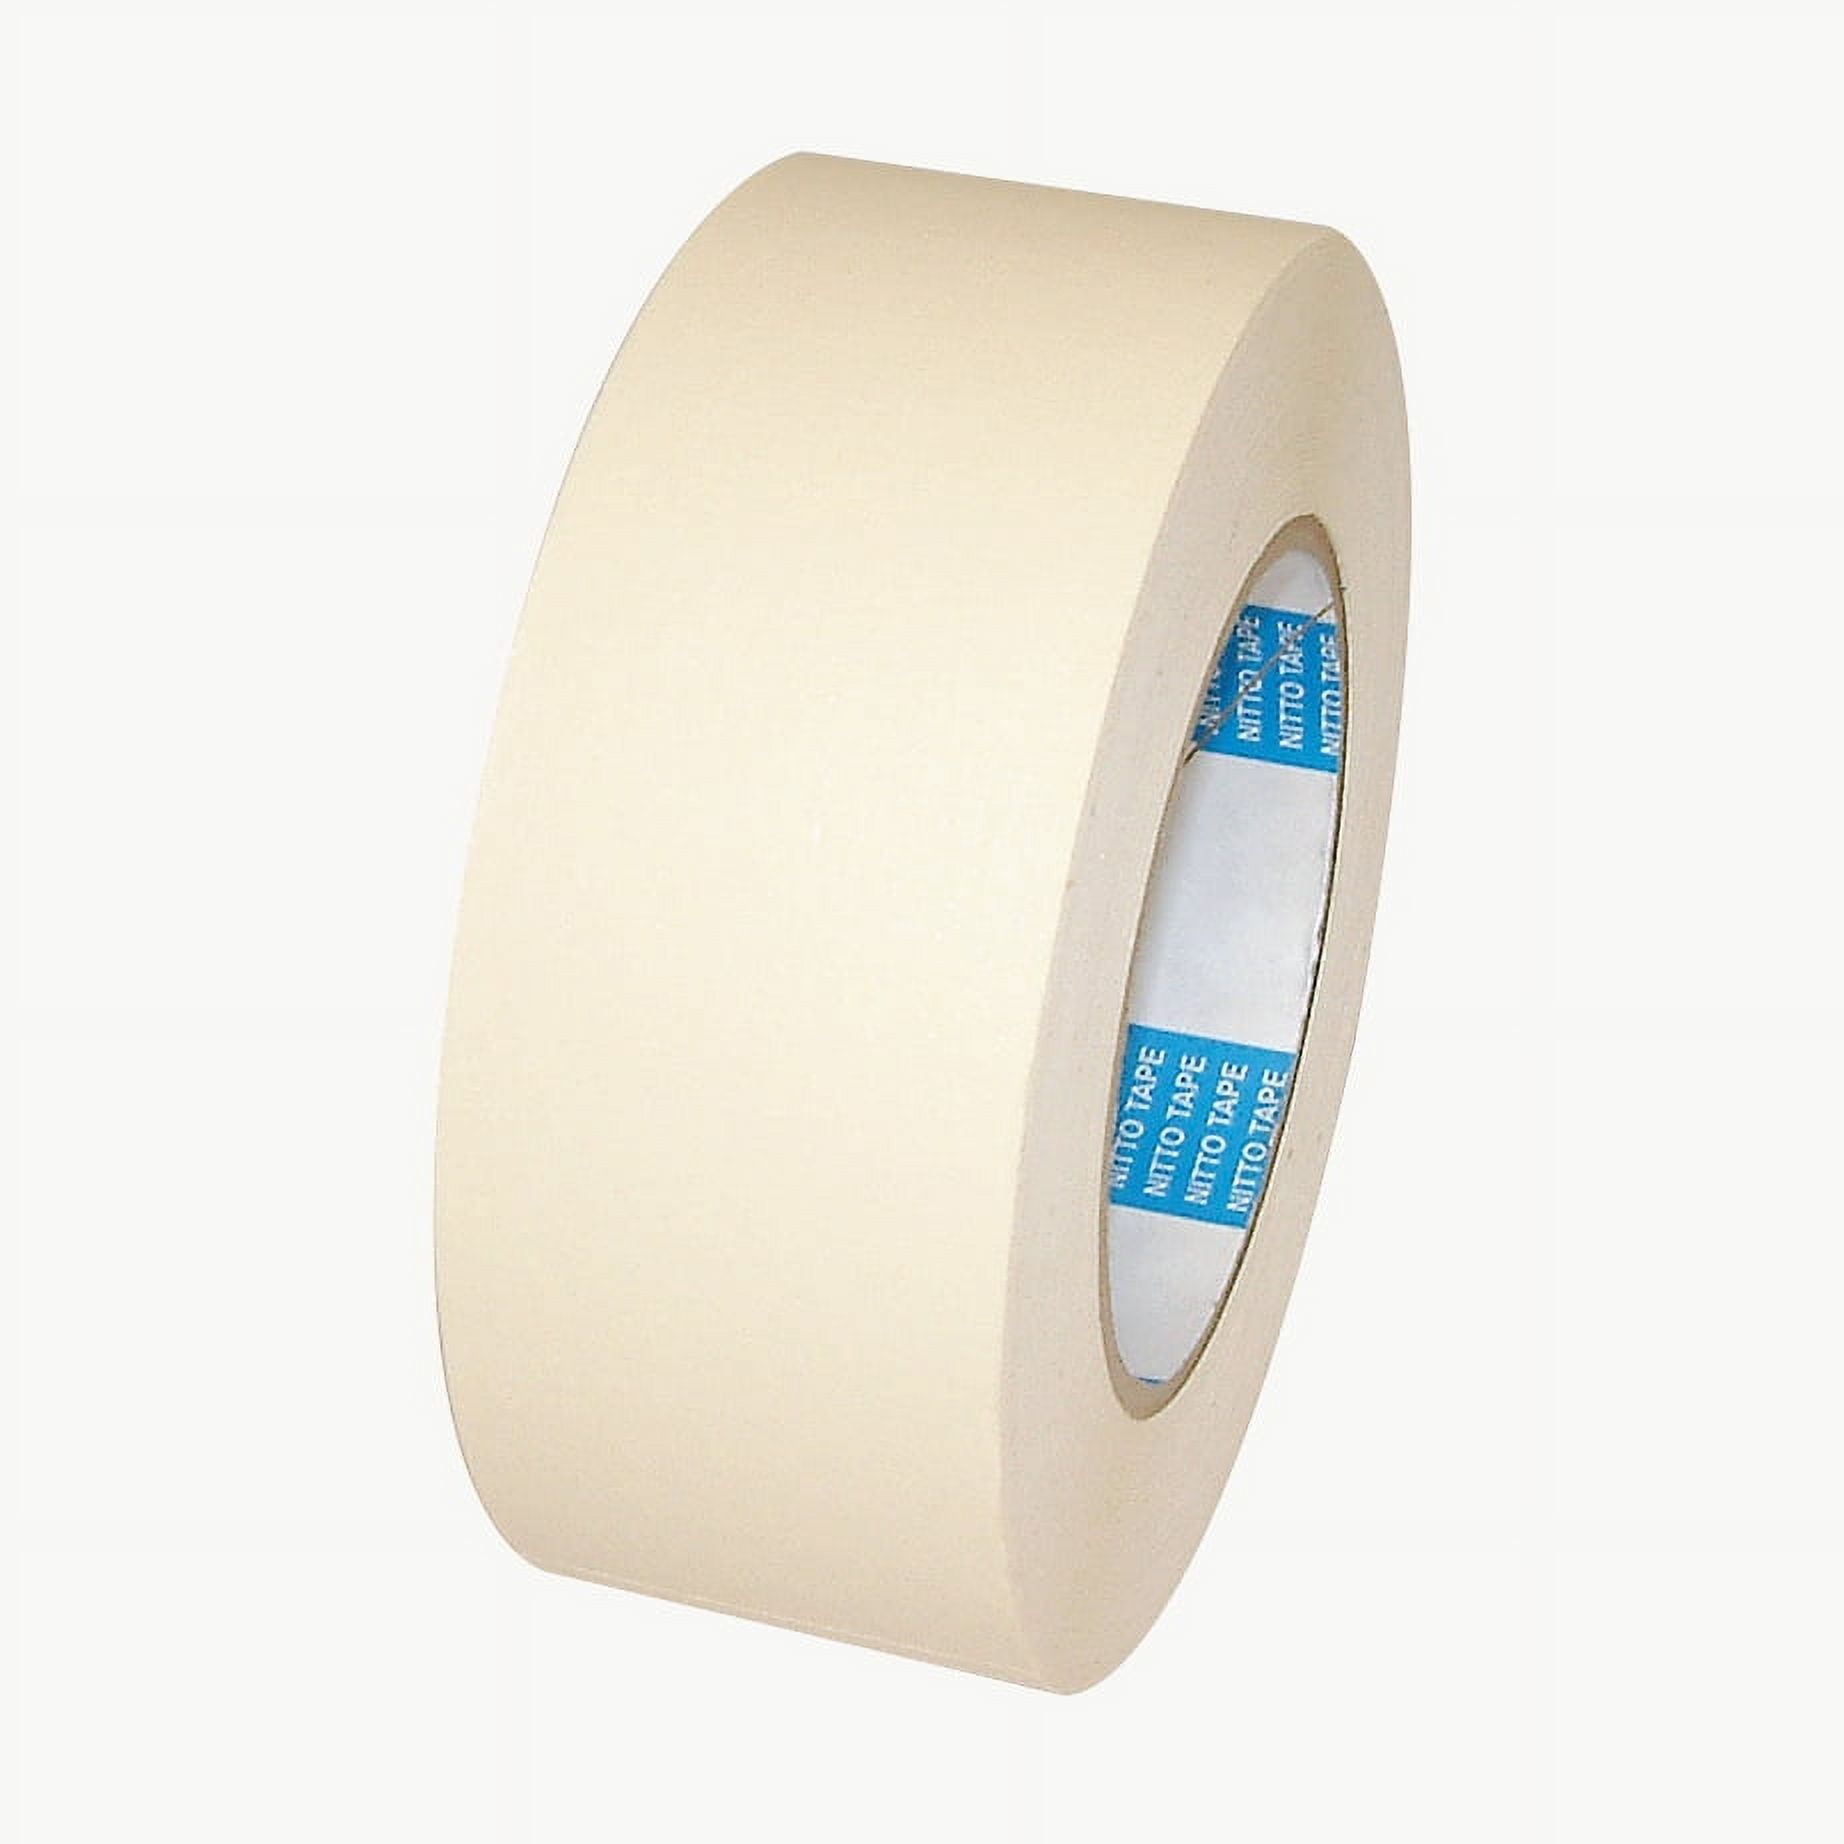 Nitto (Permacel) P-703 High Temperature Masking Tape: 2 in x 60 yds.  (Natural) 